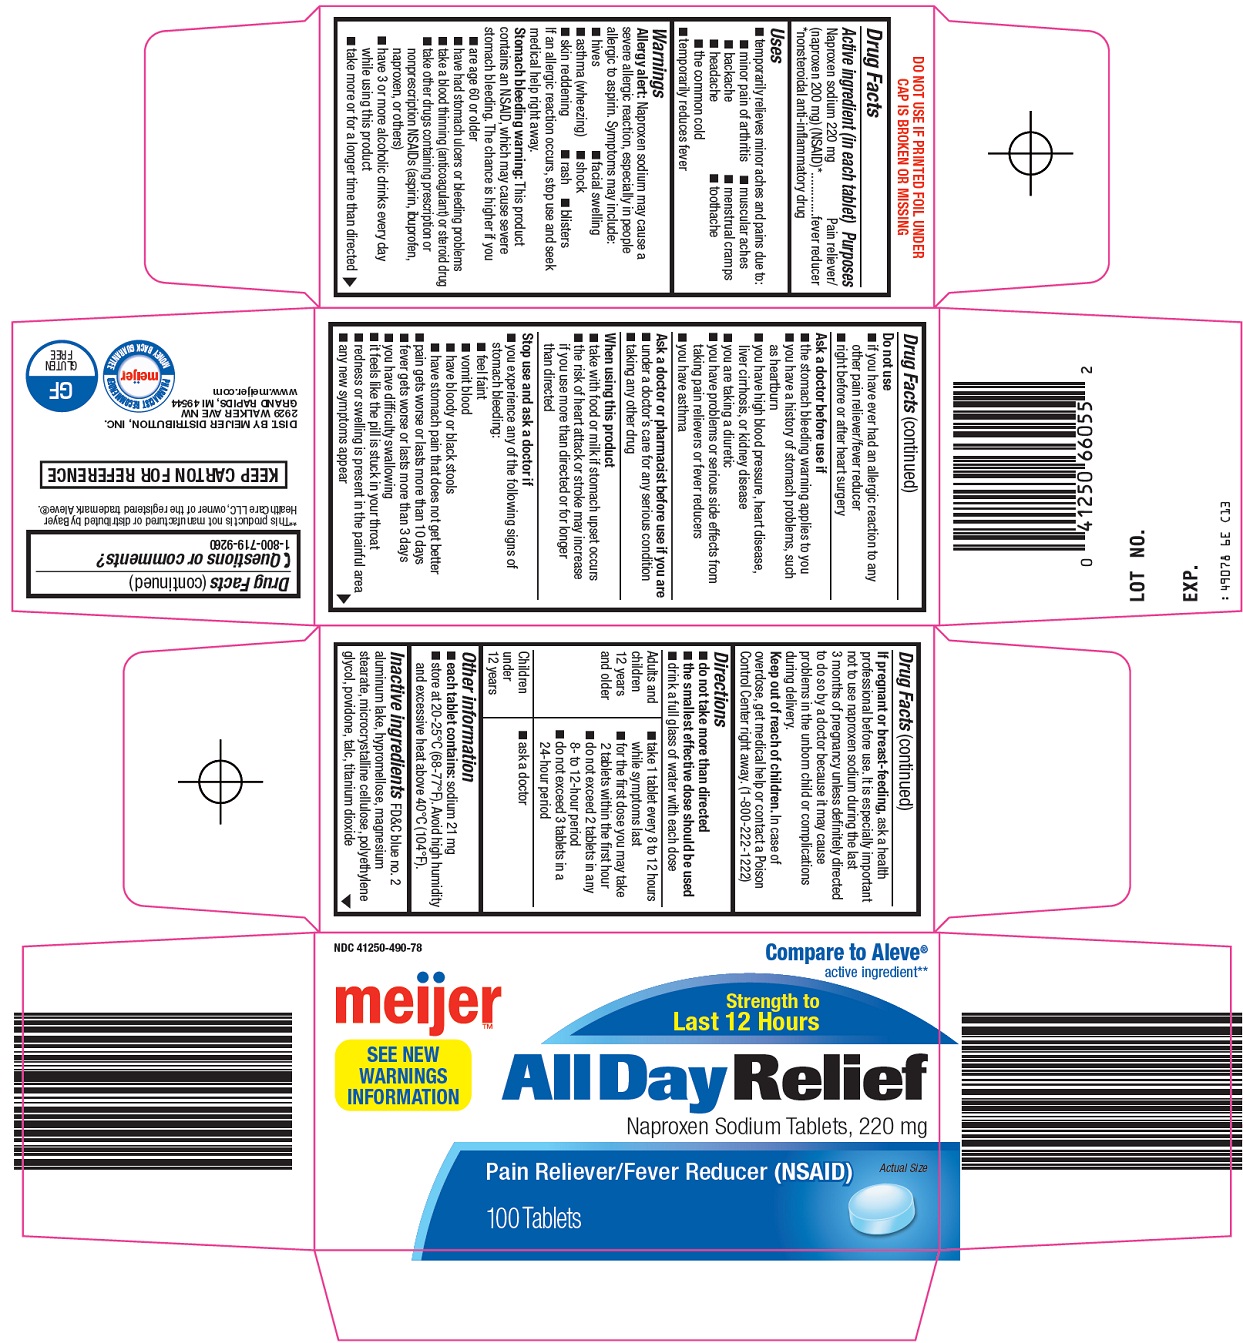 All Day Relief Carton Image